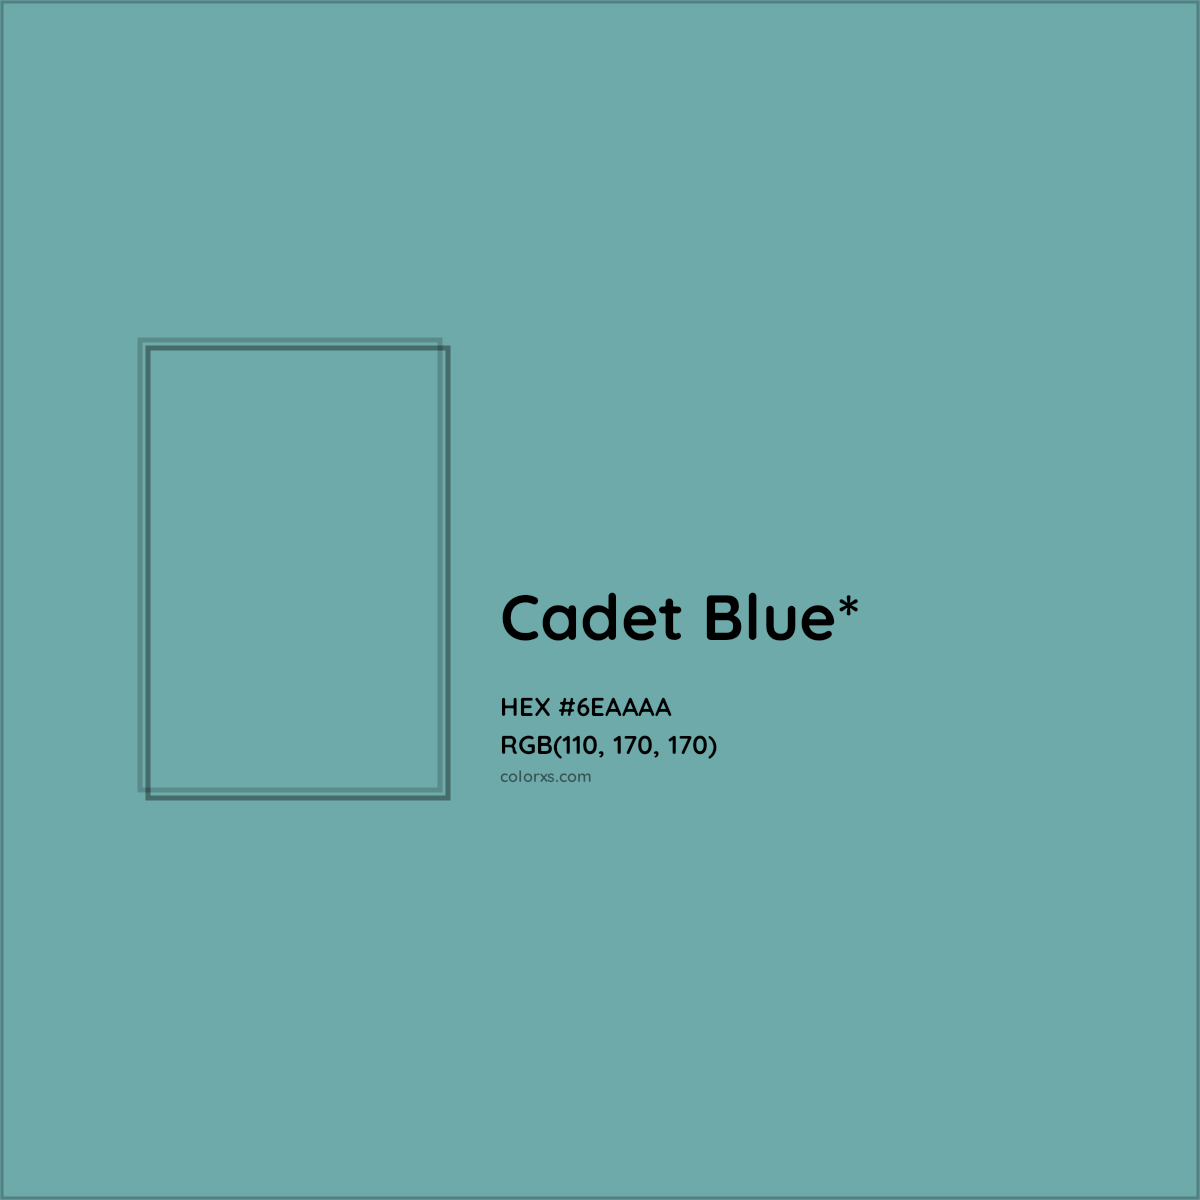 HEX #6EAAAA Color Name, Color Code, Palettes, Similar Paints, Images